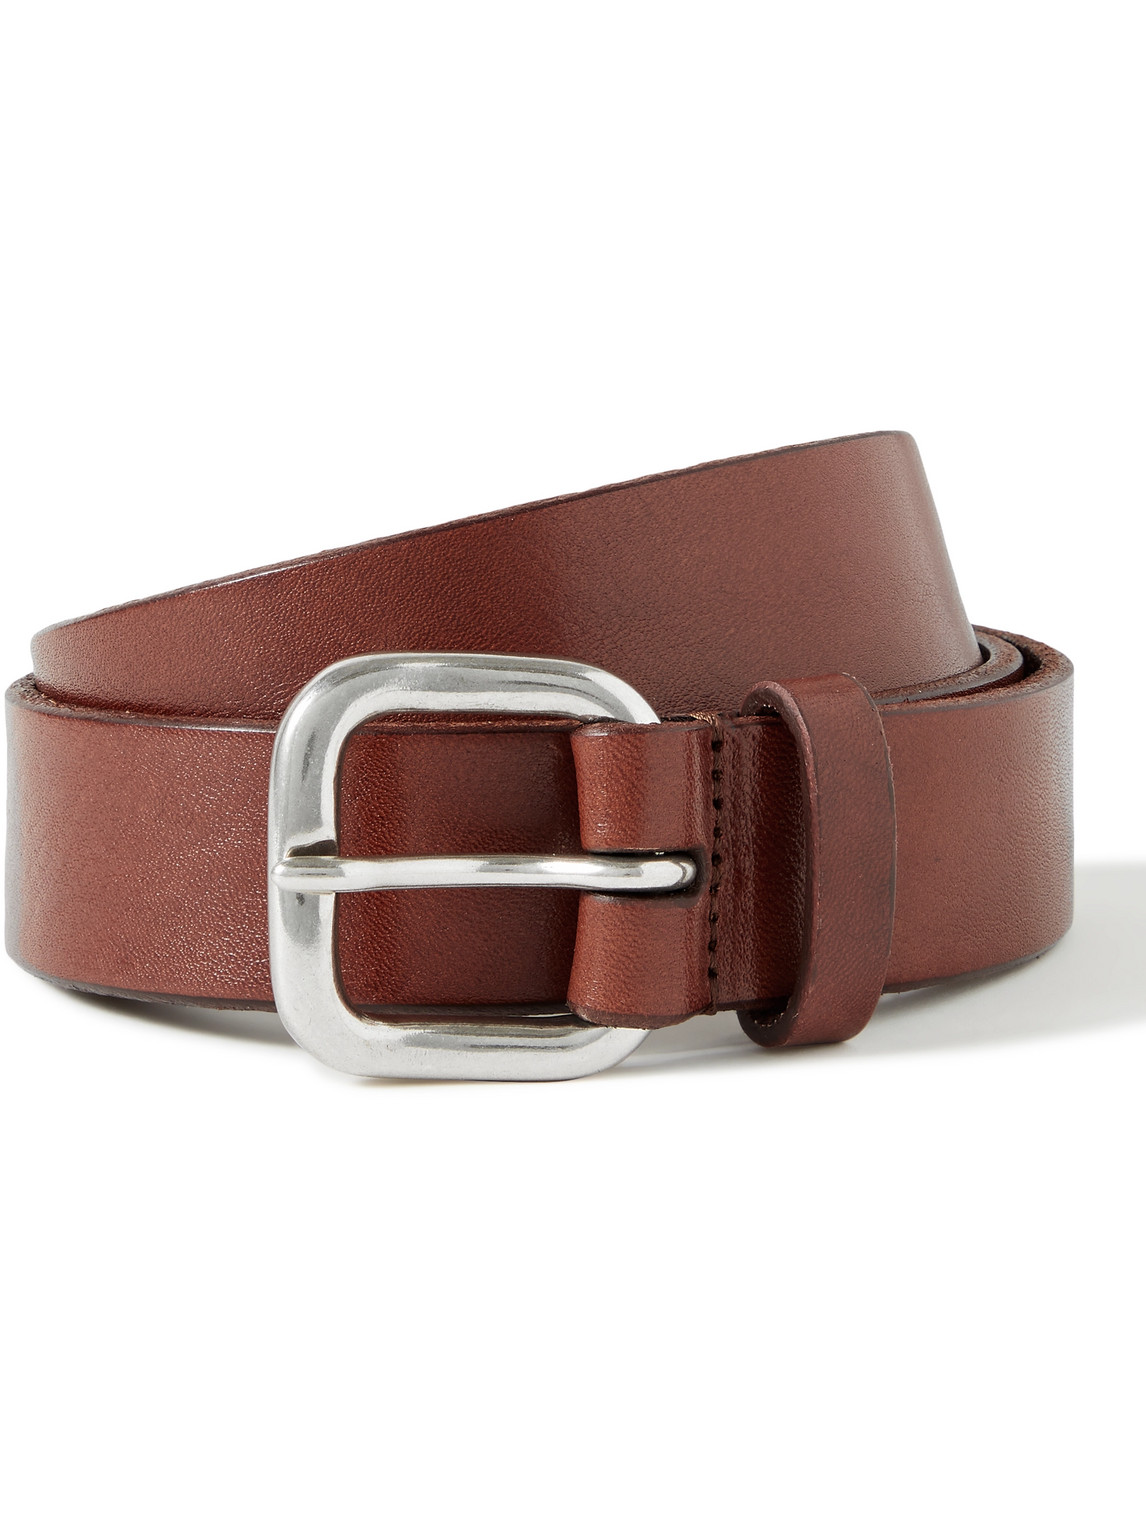 ANDERSON'S 3CM LEATHER BELT